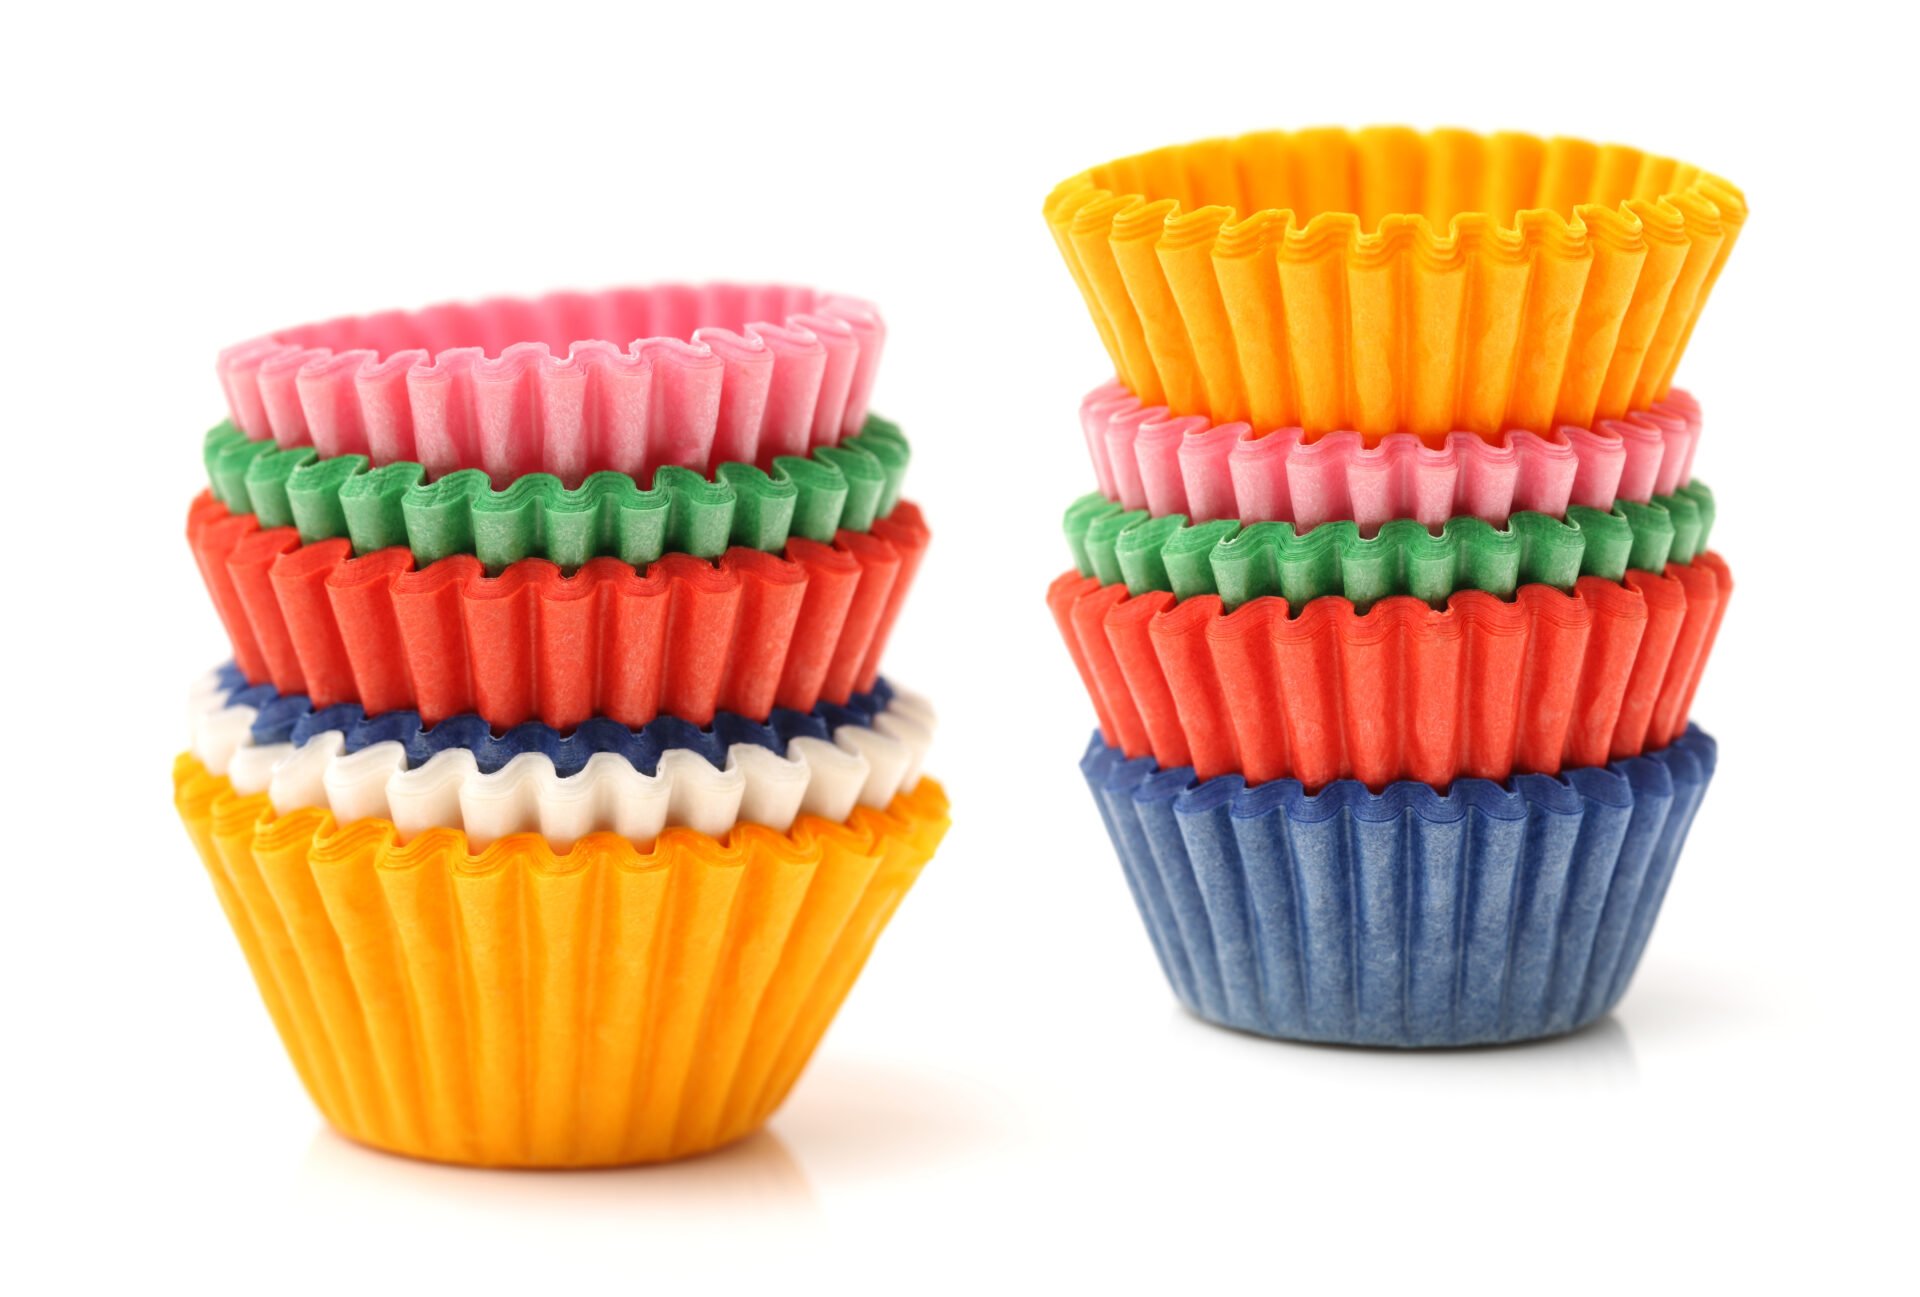 Cupcake Liners Tested For Indications of PFAS Forever Chemicals